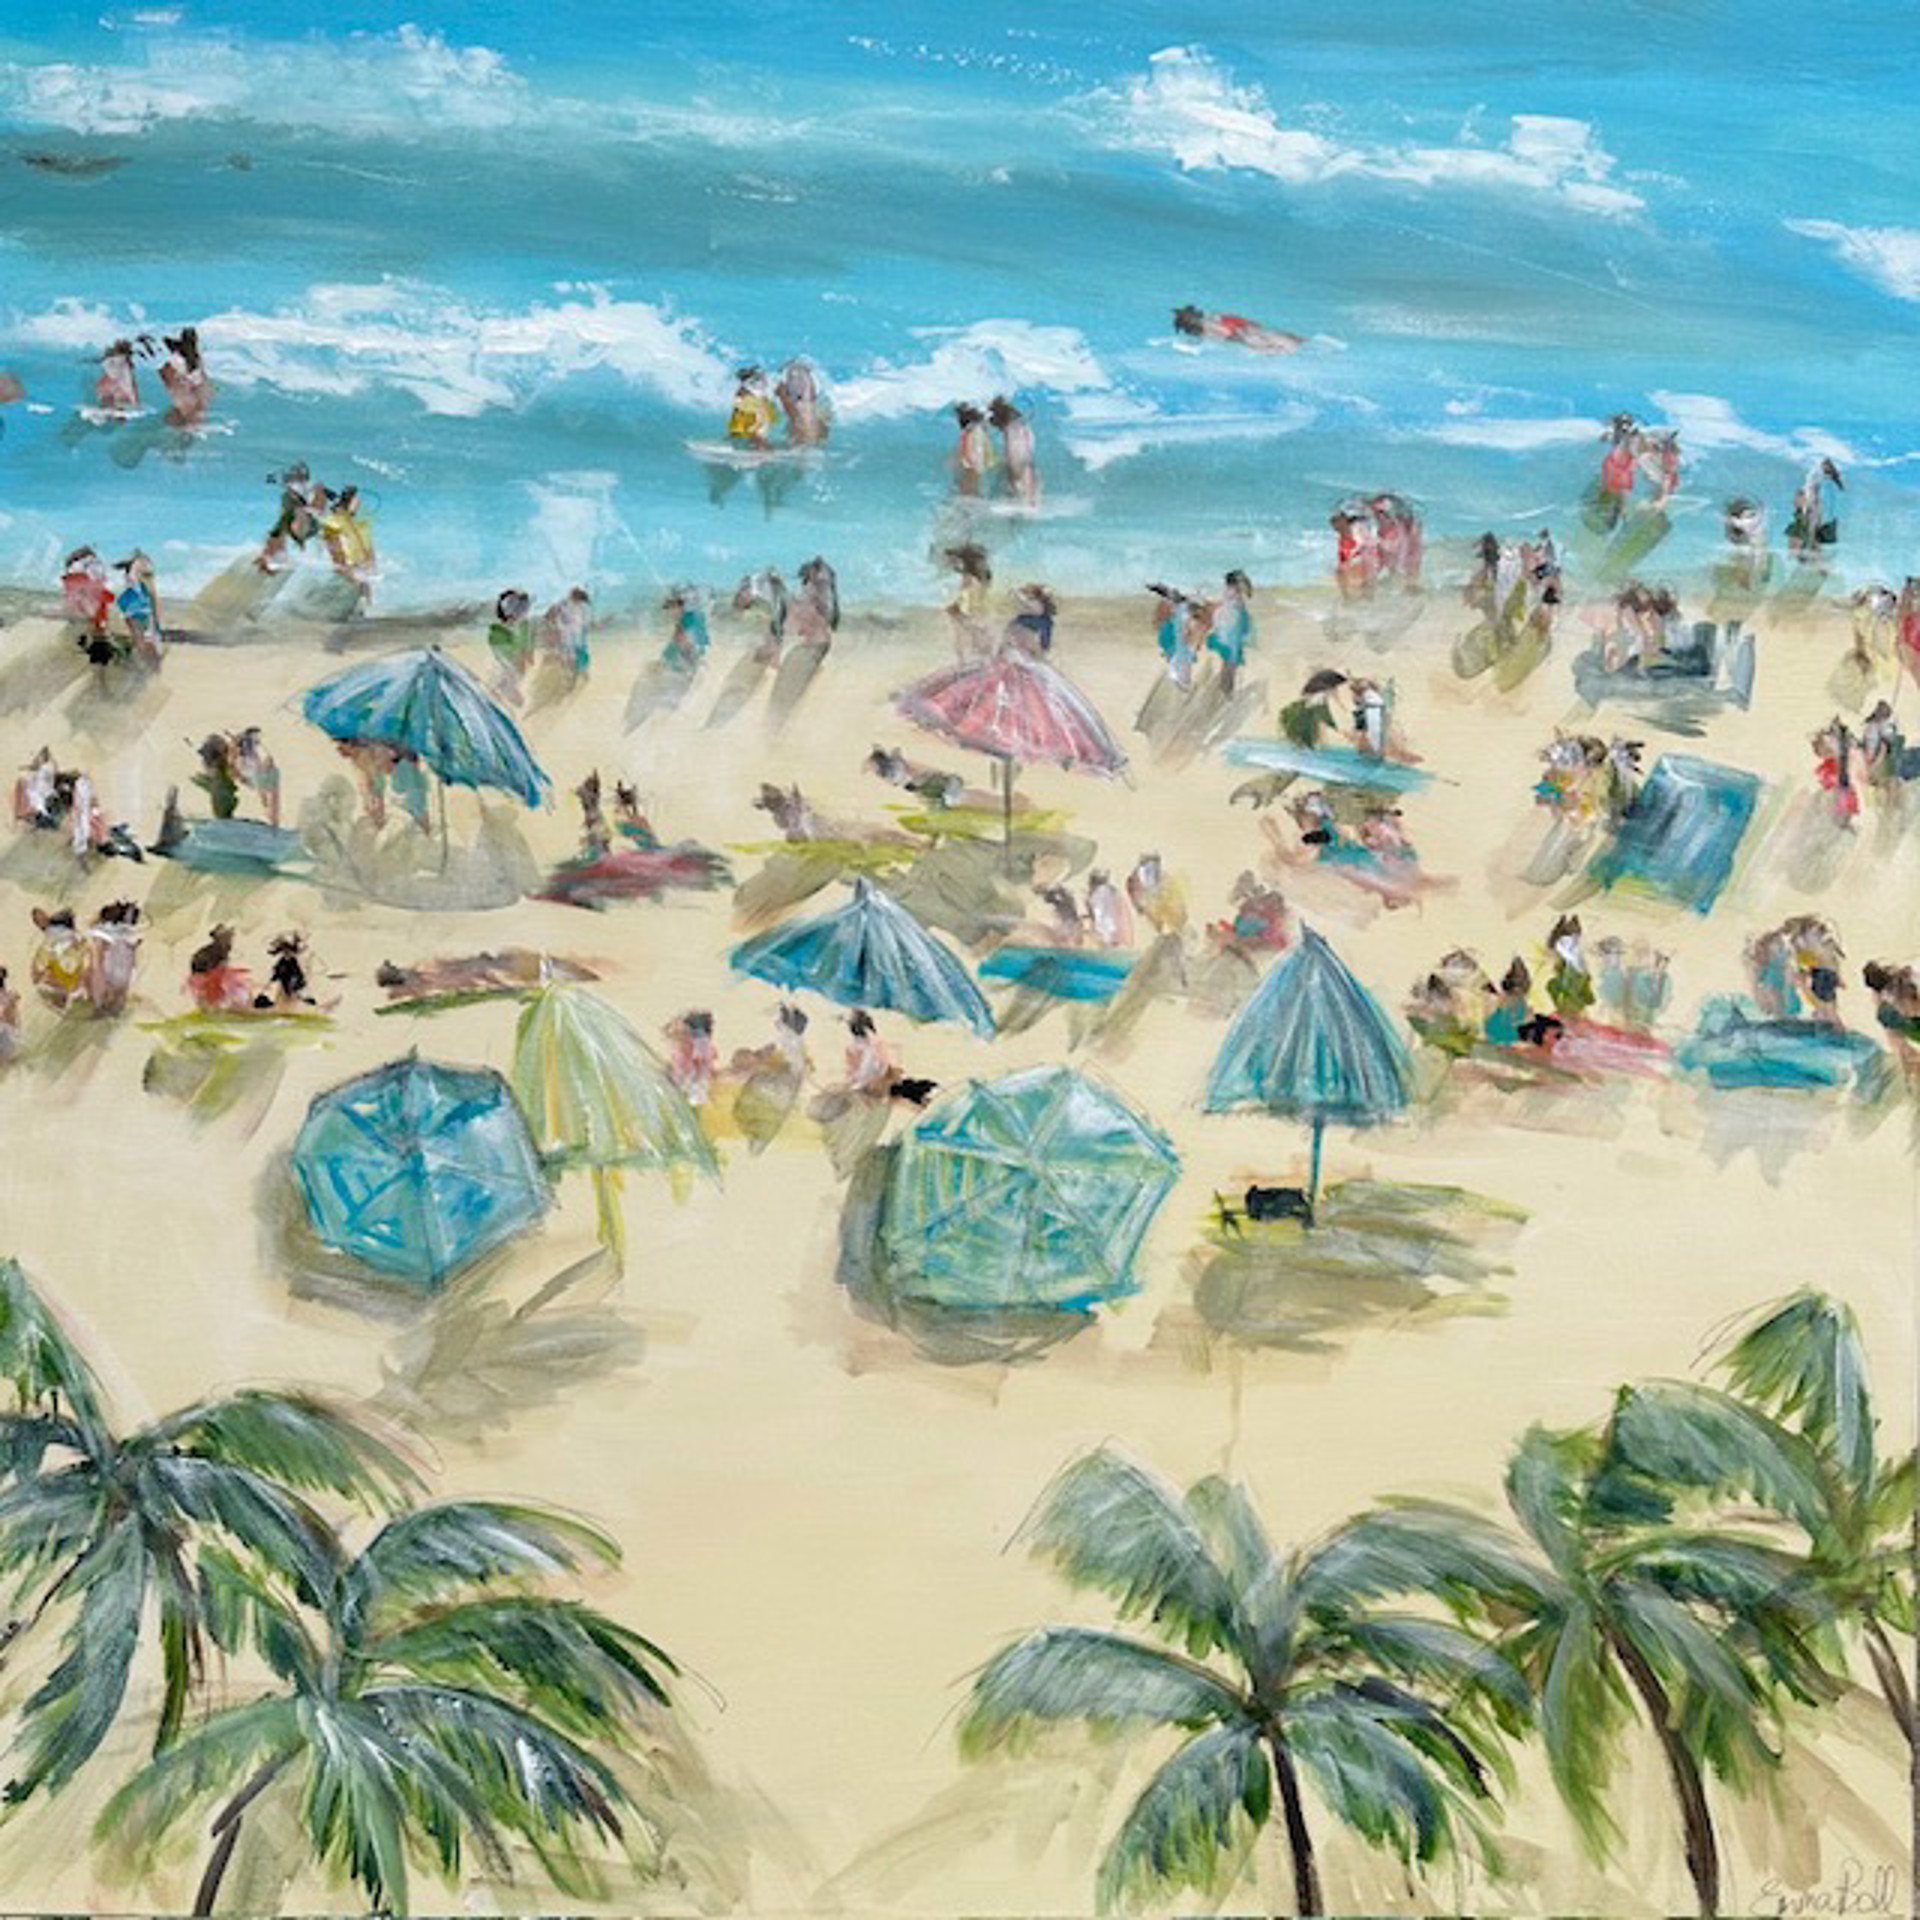 Palms and Umbrellas by Emma Bell